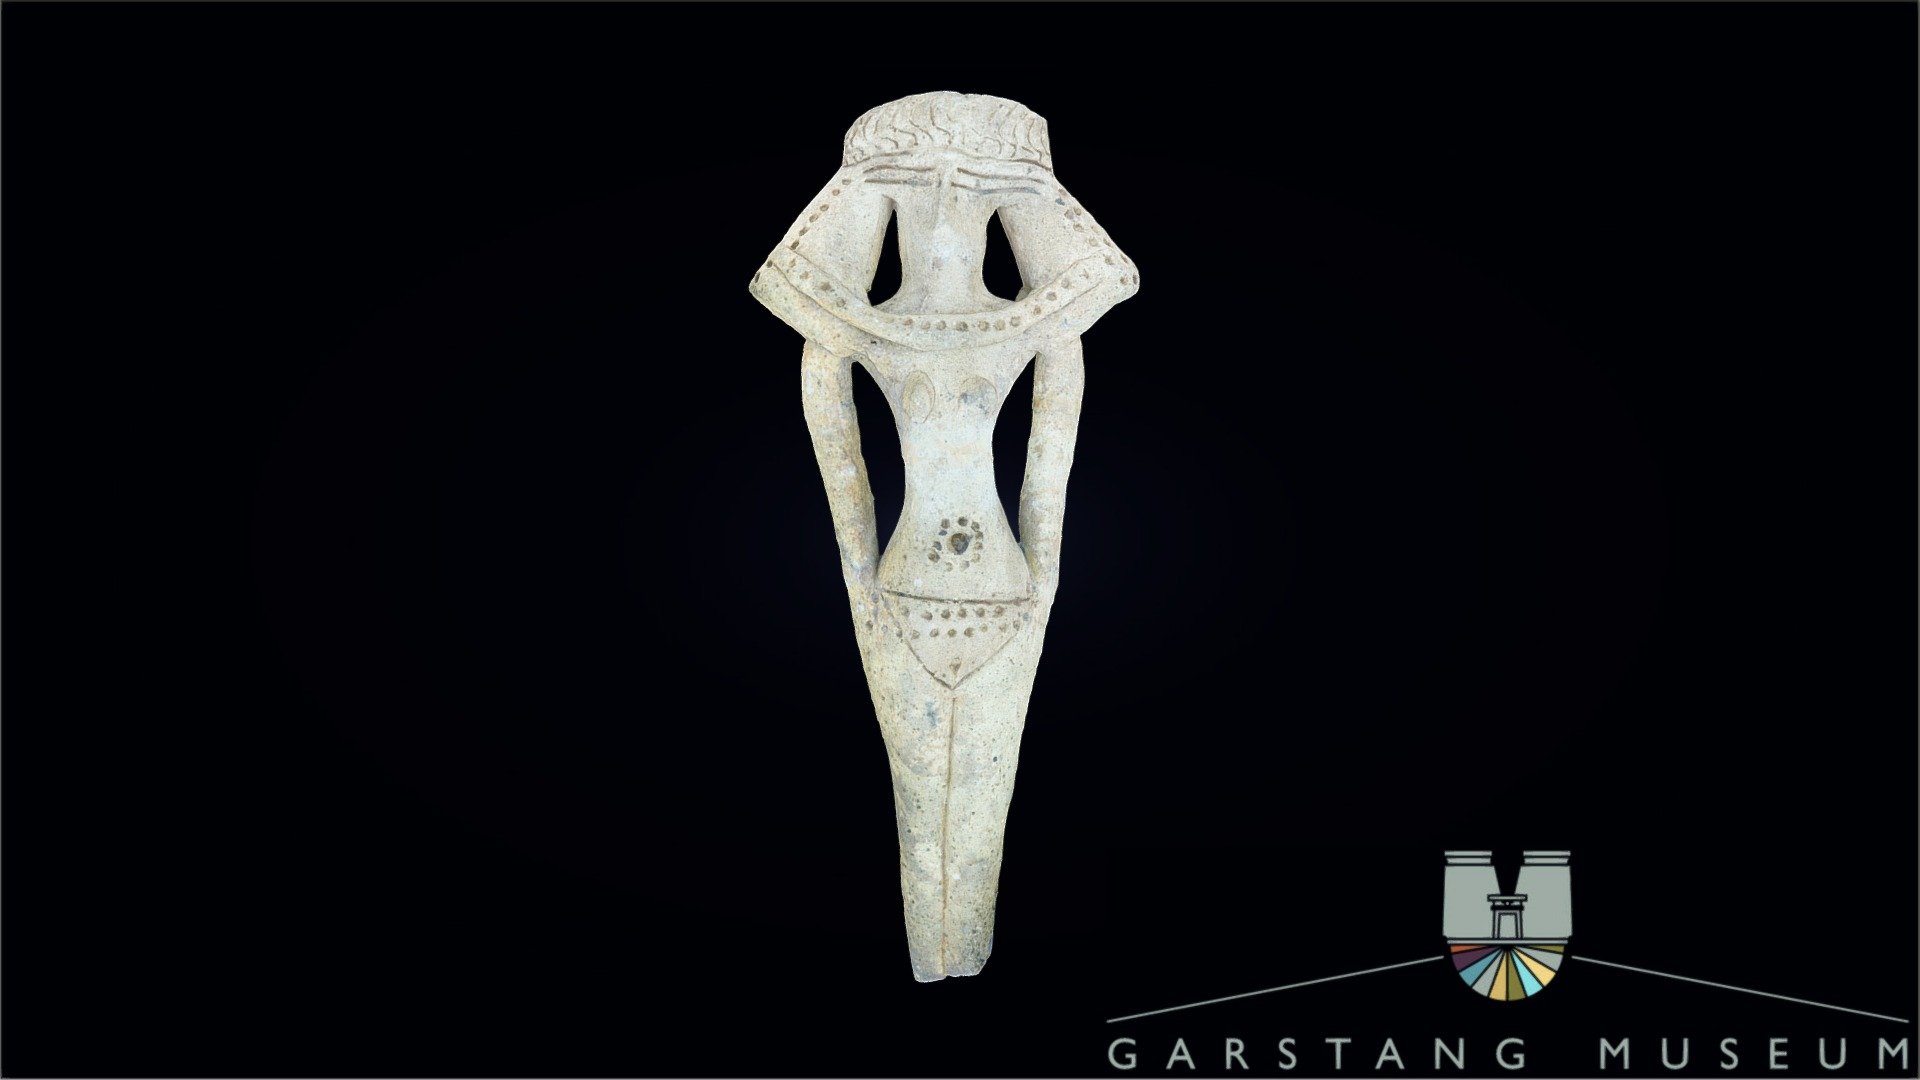 An ancient Egyptian figurine of a woman with bird-like features and &lsquo;puncture' decoration. Possibly dating to the Middle Kingdom  or Second Intermediate Period, these figurines were previously thought to have fertility connotations, although modern scholarship is moving away from this interpretation. Whilst the exact function of these figurines is unclear, they may have had particular apotropaic and healing associations. Many of these figurines are found broken in a way that suggests ritual destruction. 

You can read more about female figurines in Egypt here.

Accession Number: E.6895

Photography and Model Credit: Charlotte Sargent - Female Bird-Headed Figurine - 3D model by Garstang Museum of Archaeology (@garstang) 3d model